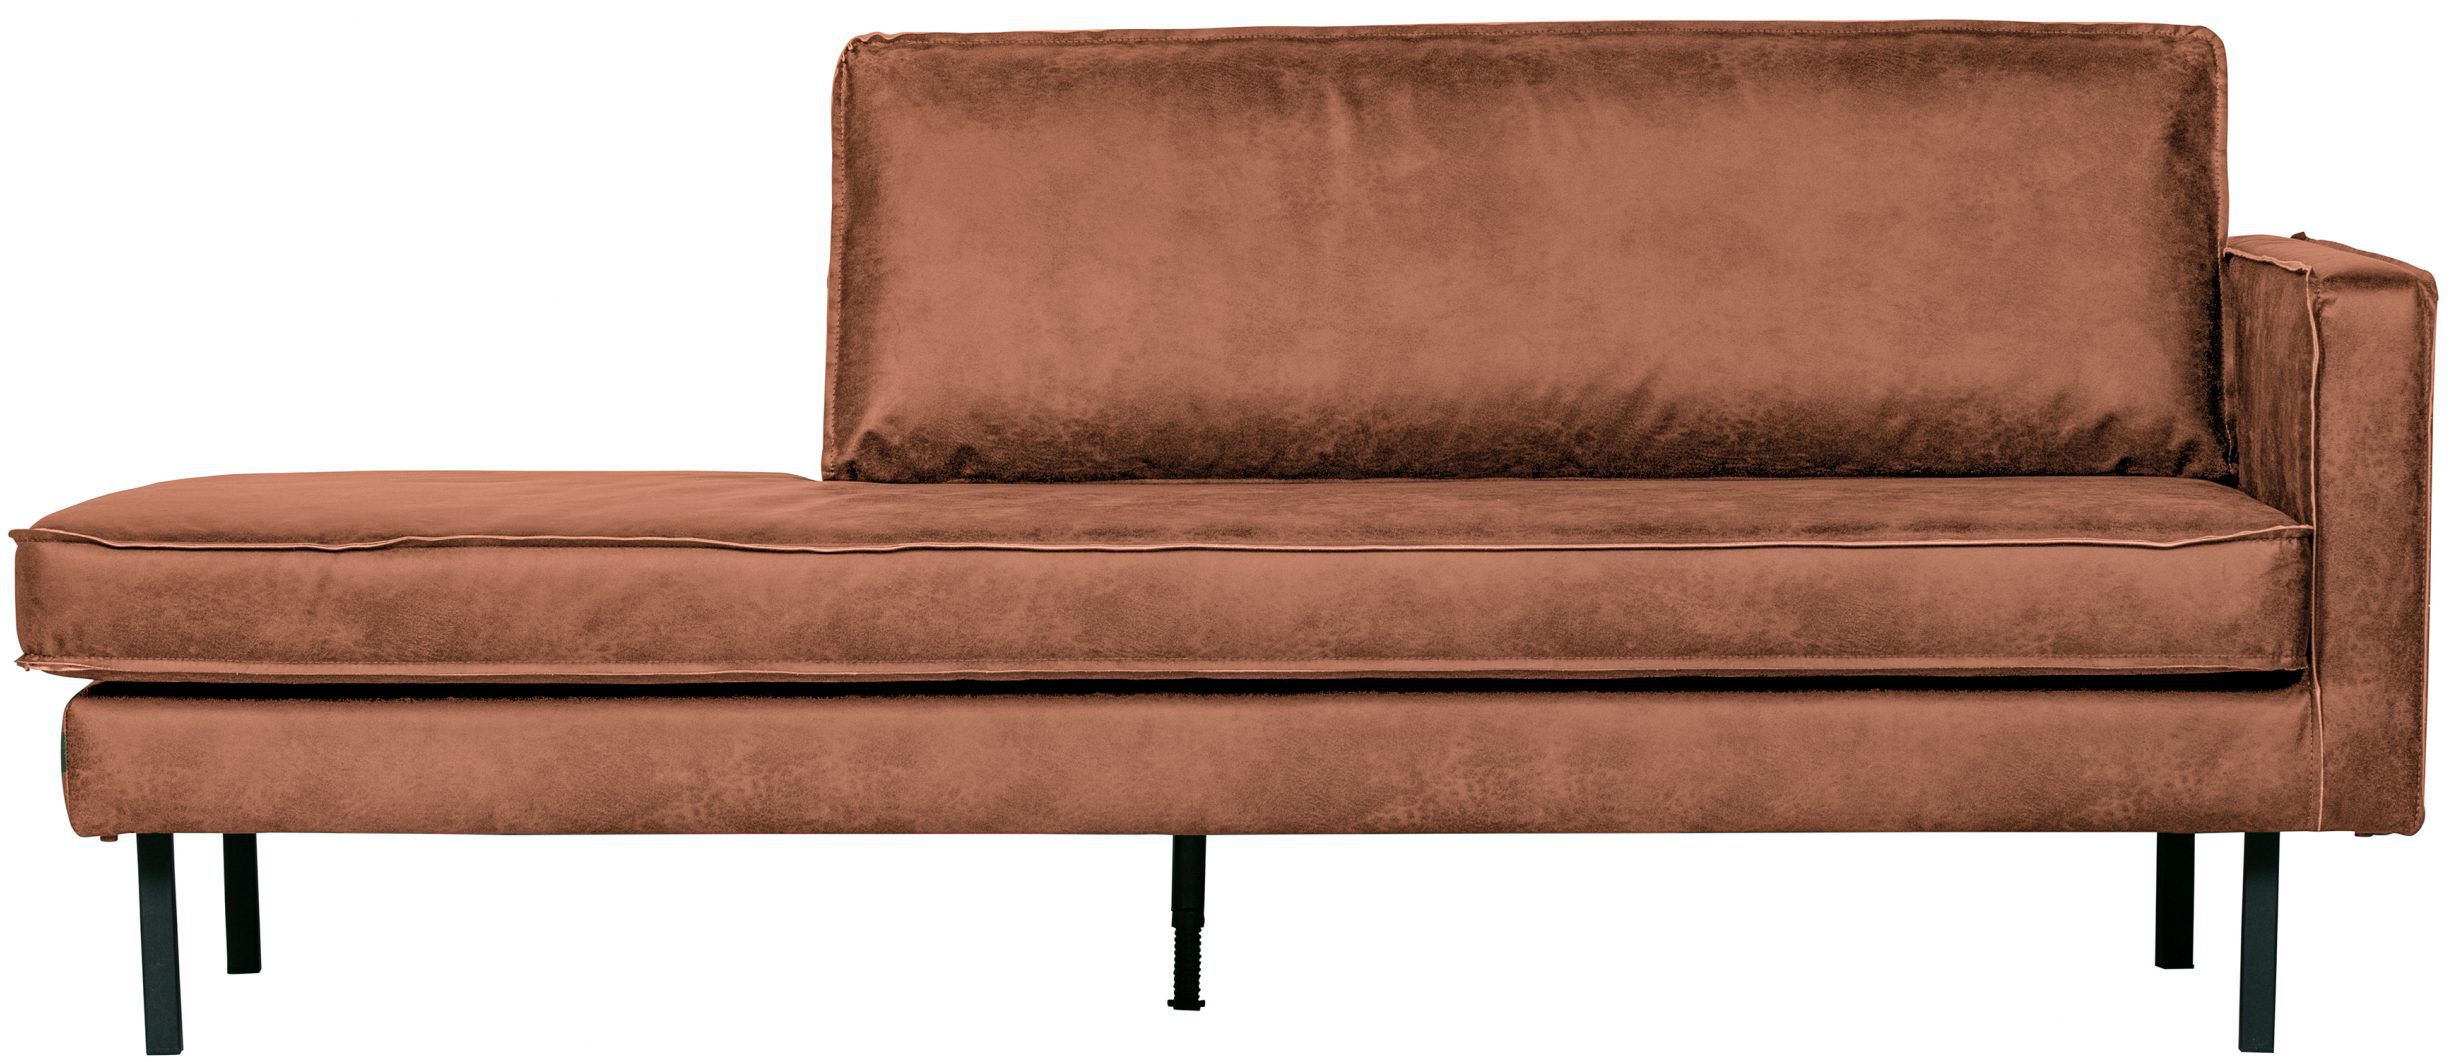 Rodeo Daybed Right - Cognac